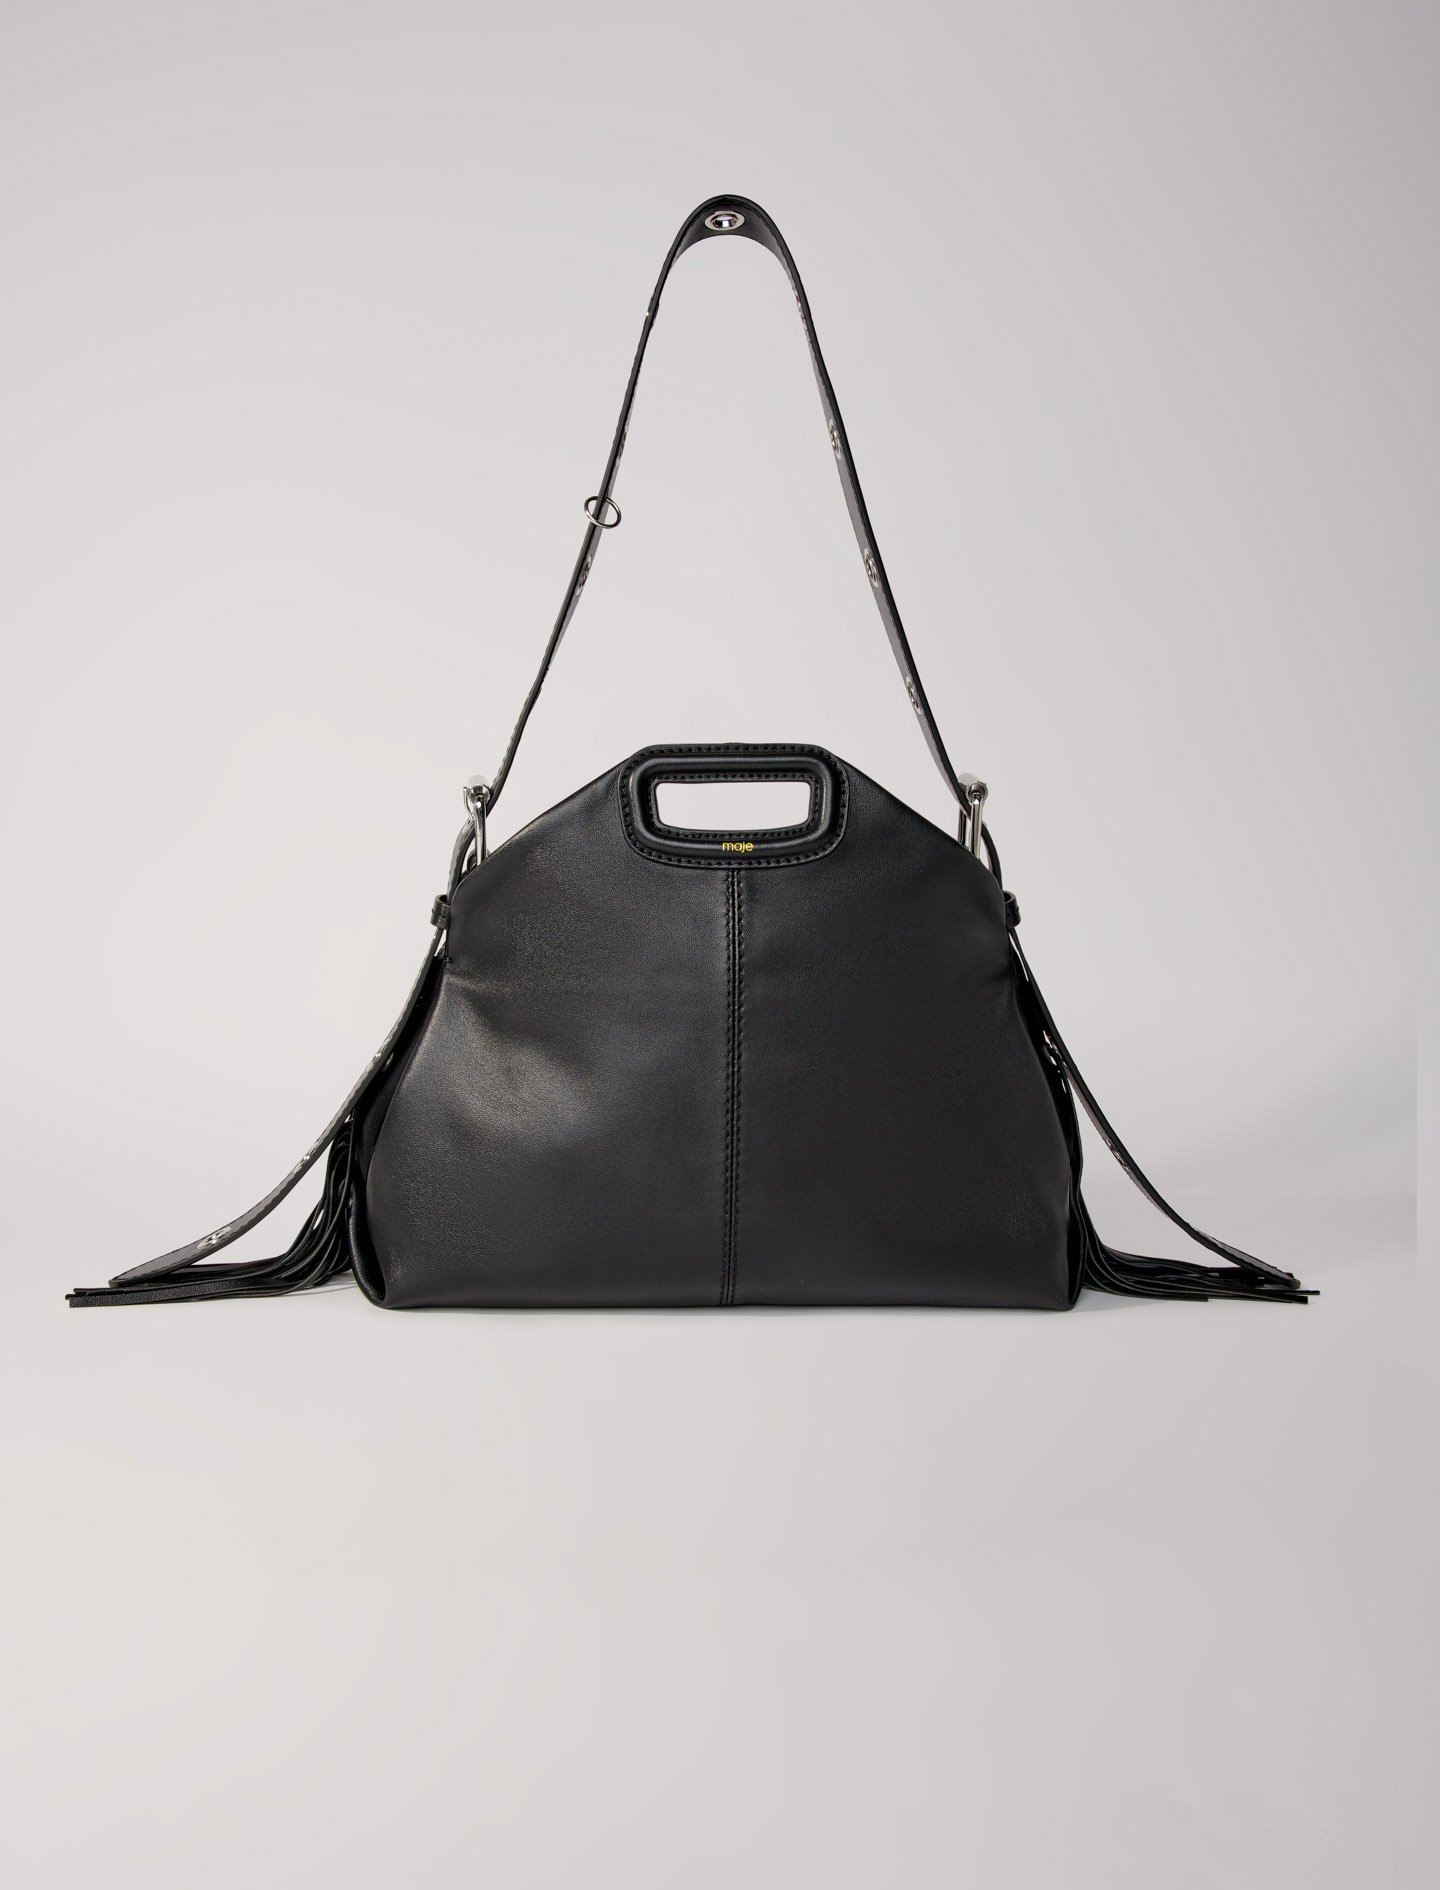 Mixte's product.tissuprincipal: Leather: Smooth leather Miss M bag for Spring/Summer, size Mixte-All Bags-OS (ONE SIZE), in color Black / Black